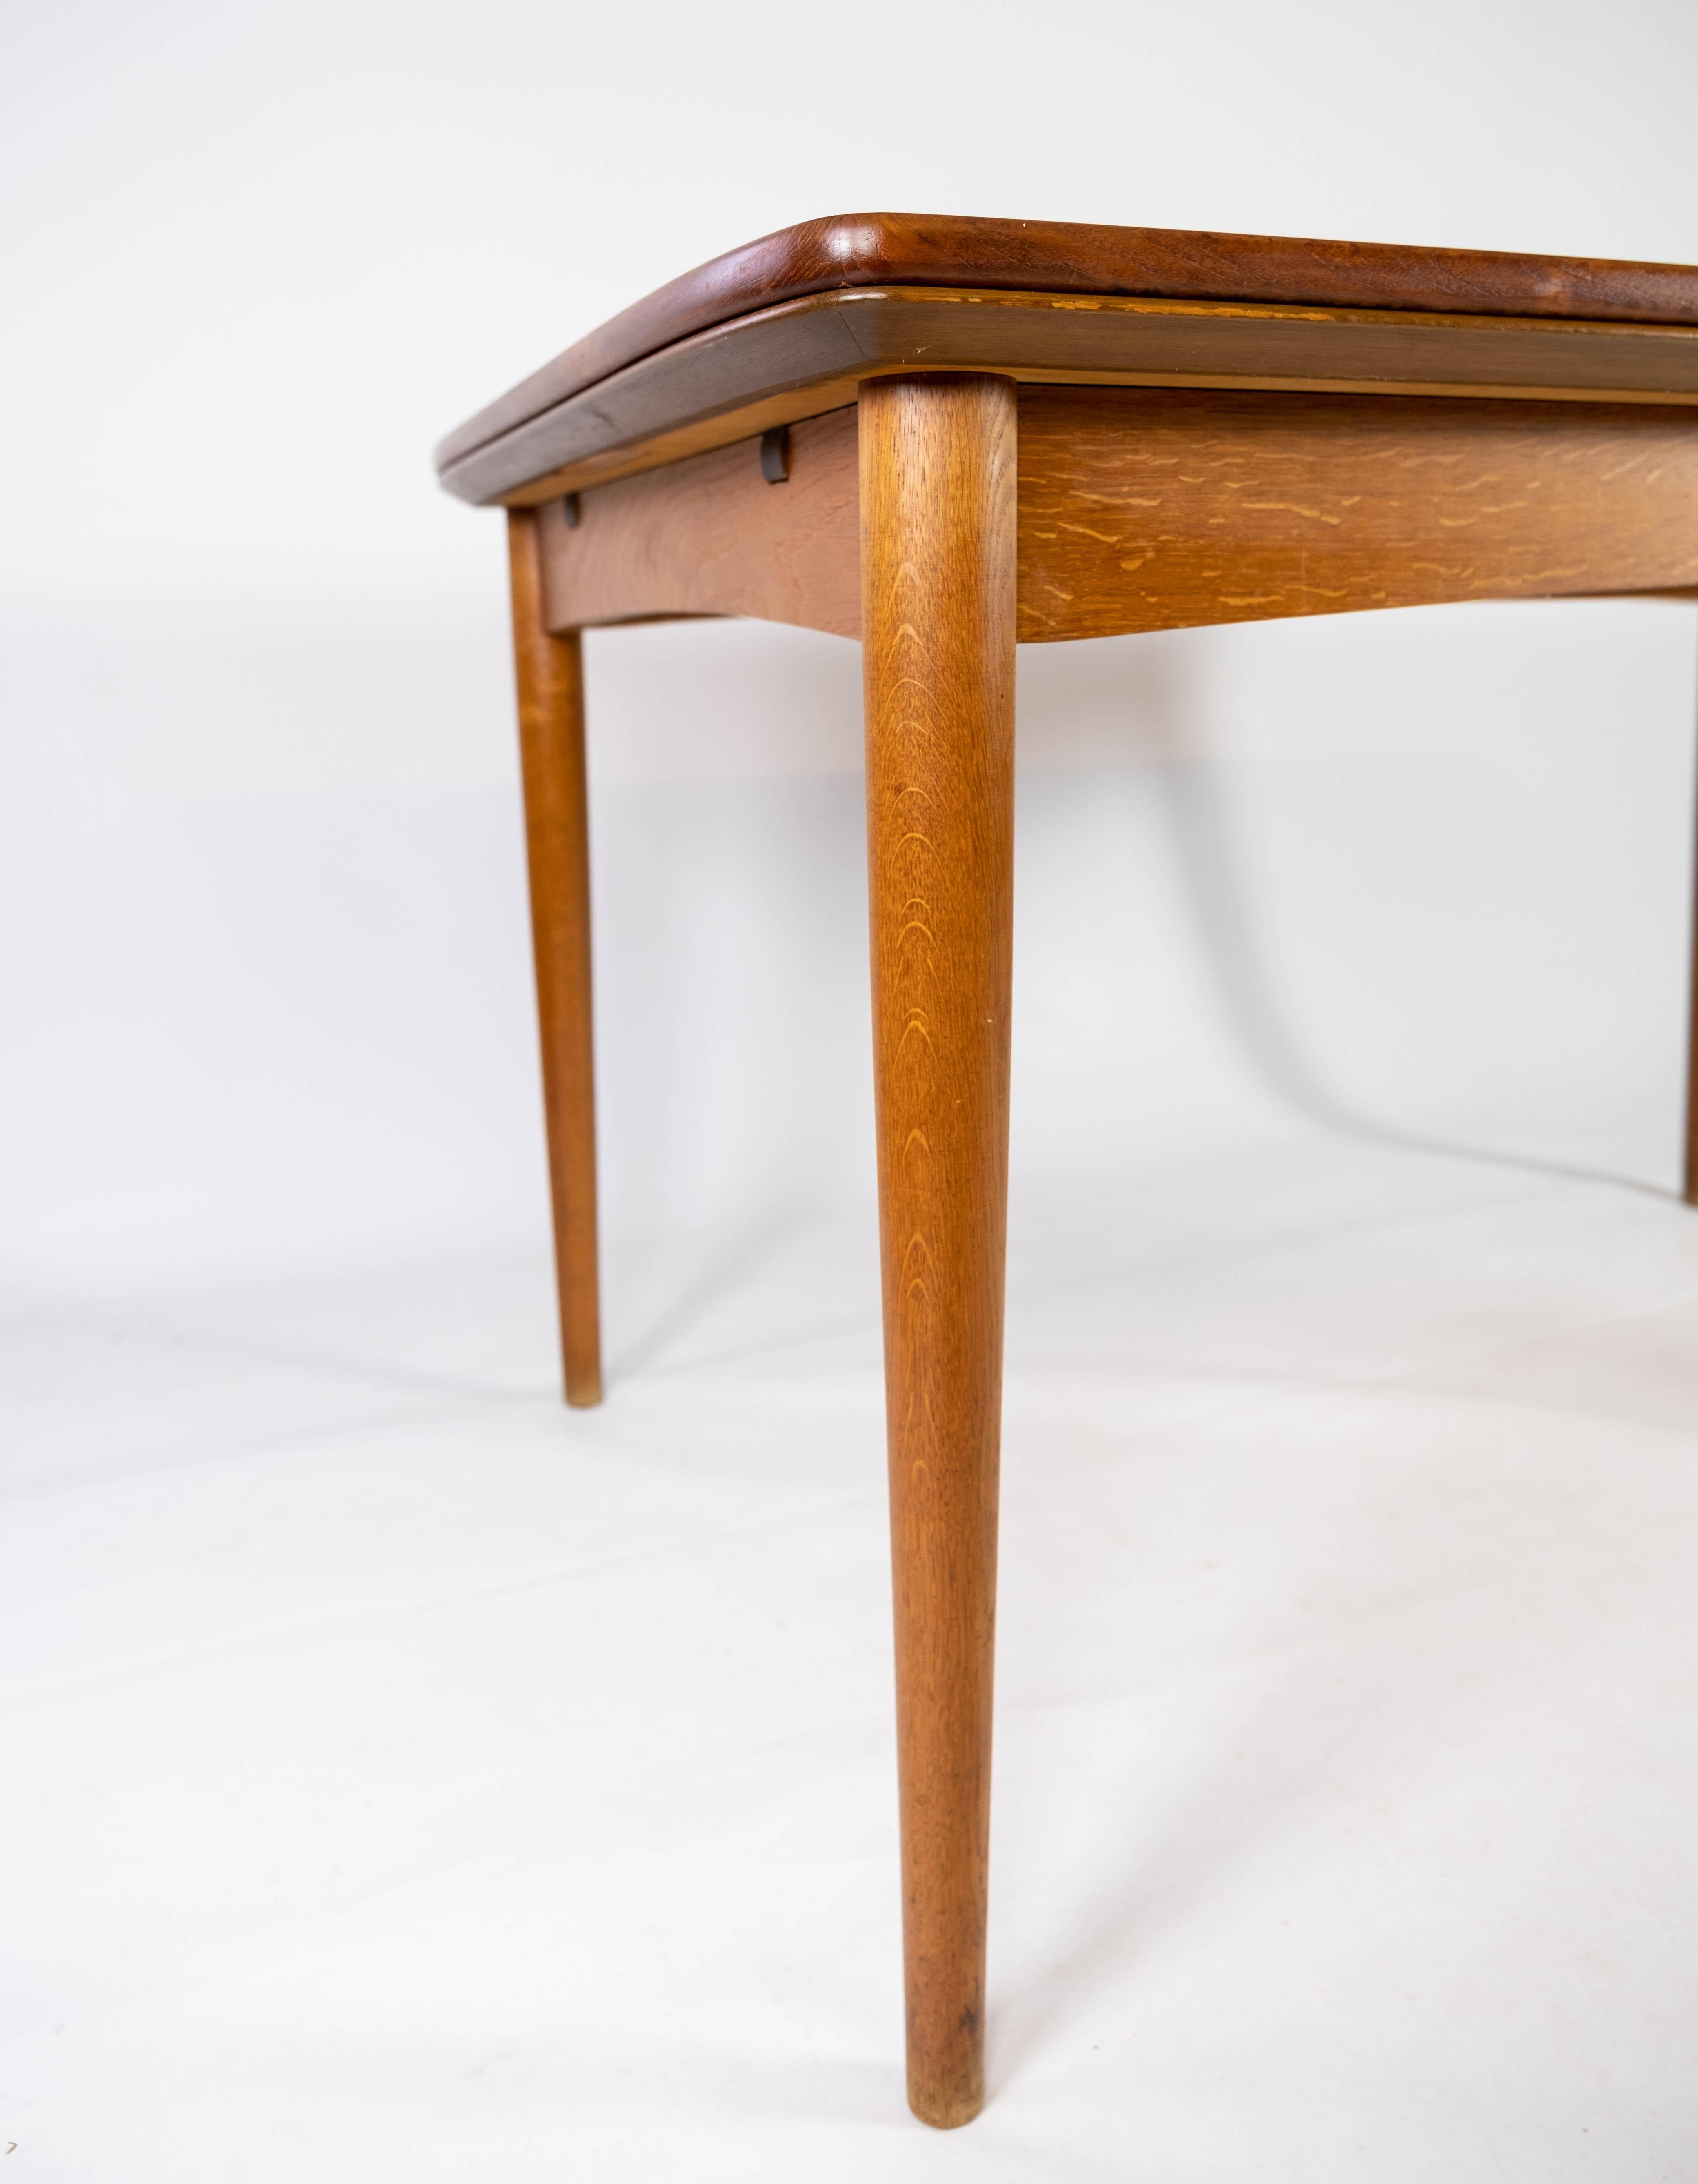 Mid-20th Century Dining Table in Teak with Extentions and Legs in Oak, of Danish Design, 1960s